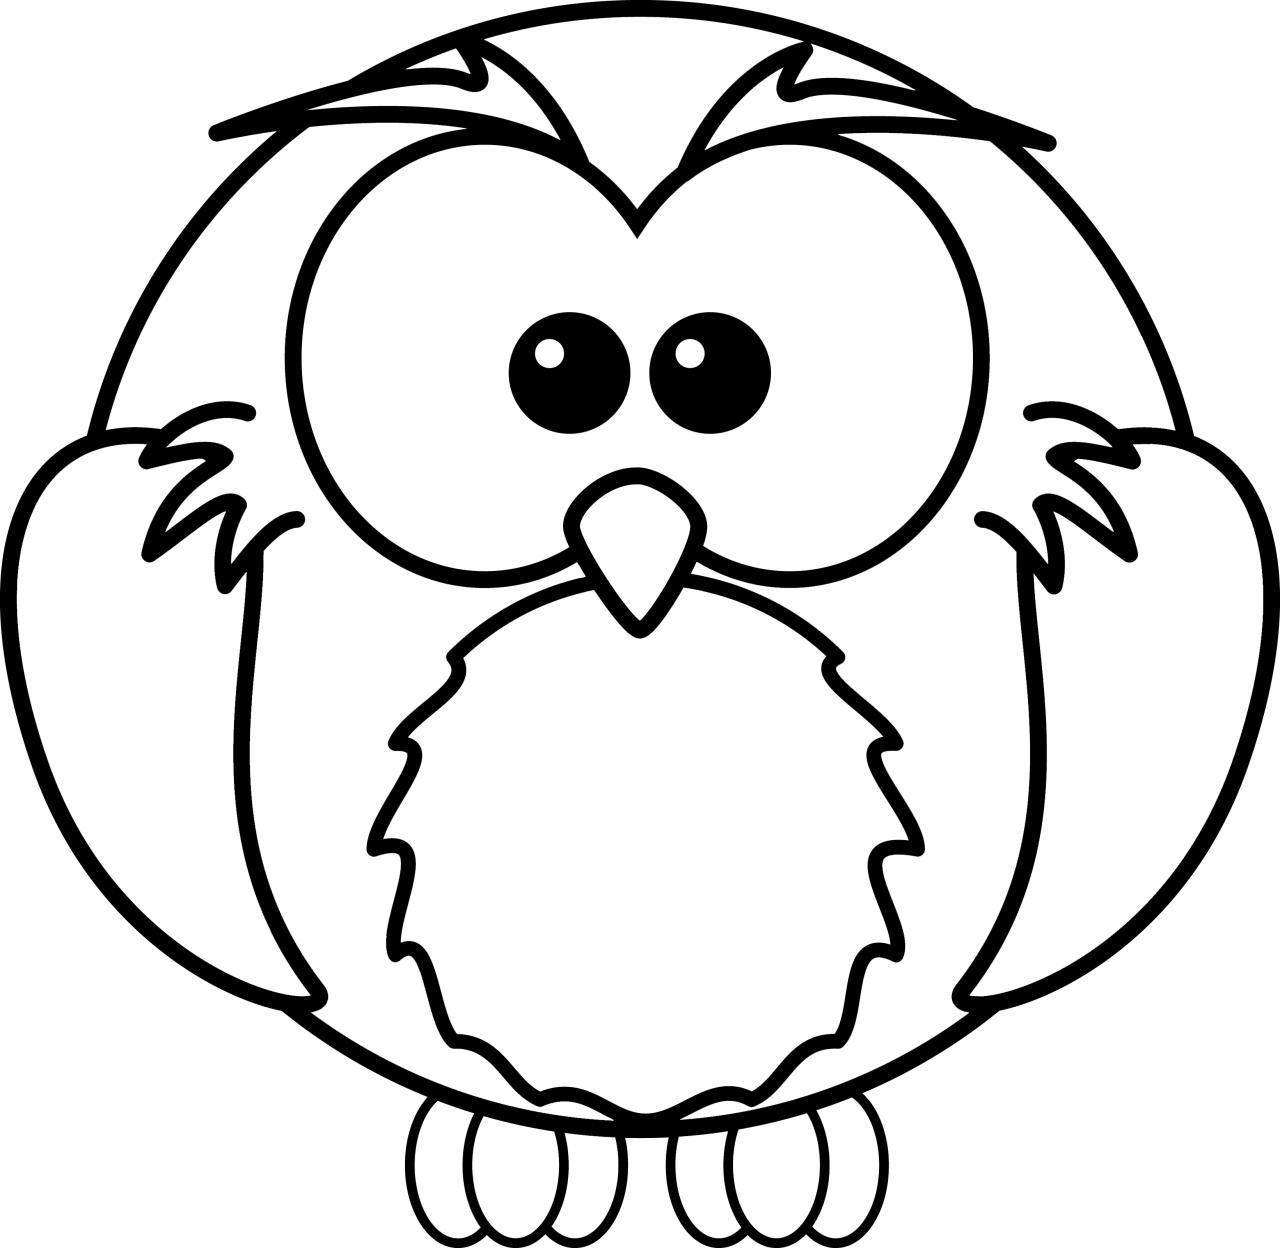 Coloring Pages Of An Owl